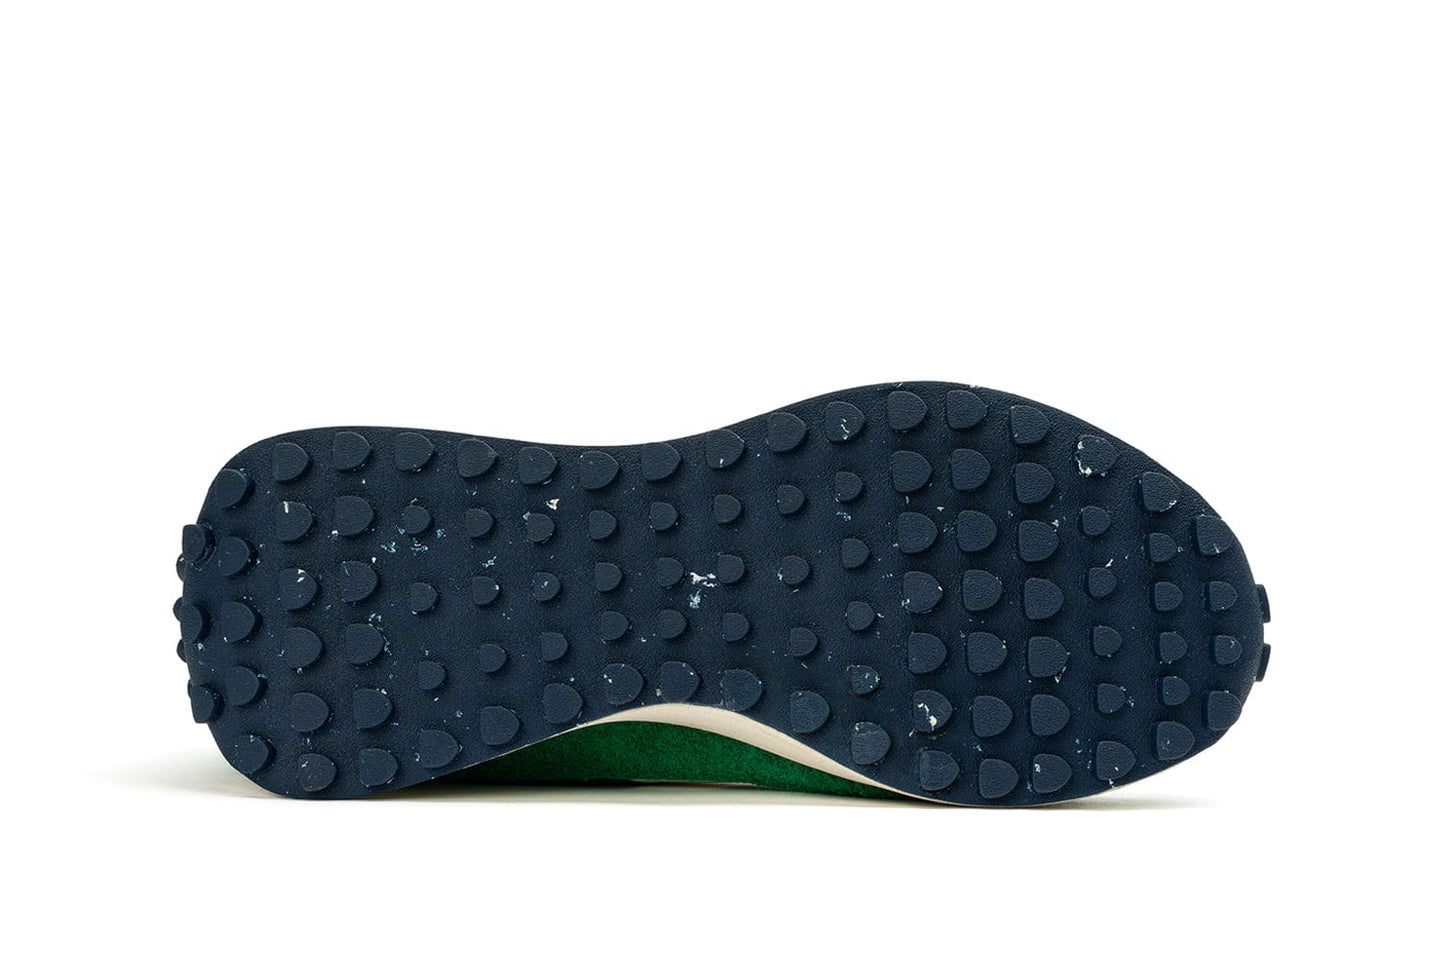 The sole of a SeaVees 'Acorn' sneaker in Grass Green, highlighting the navy outsole with its tread pattern.